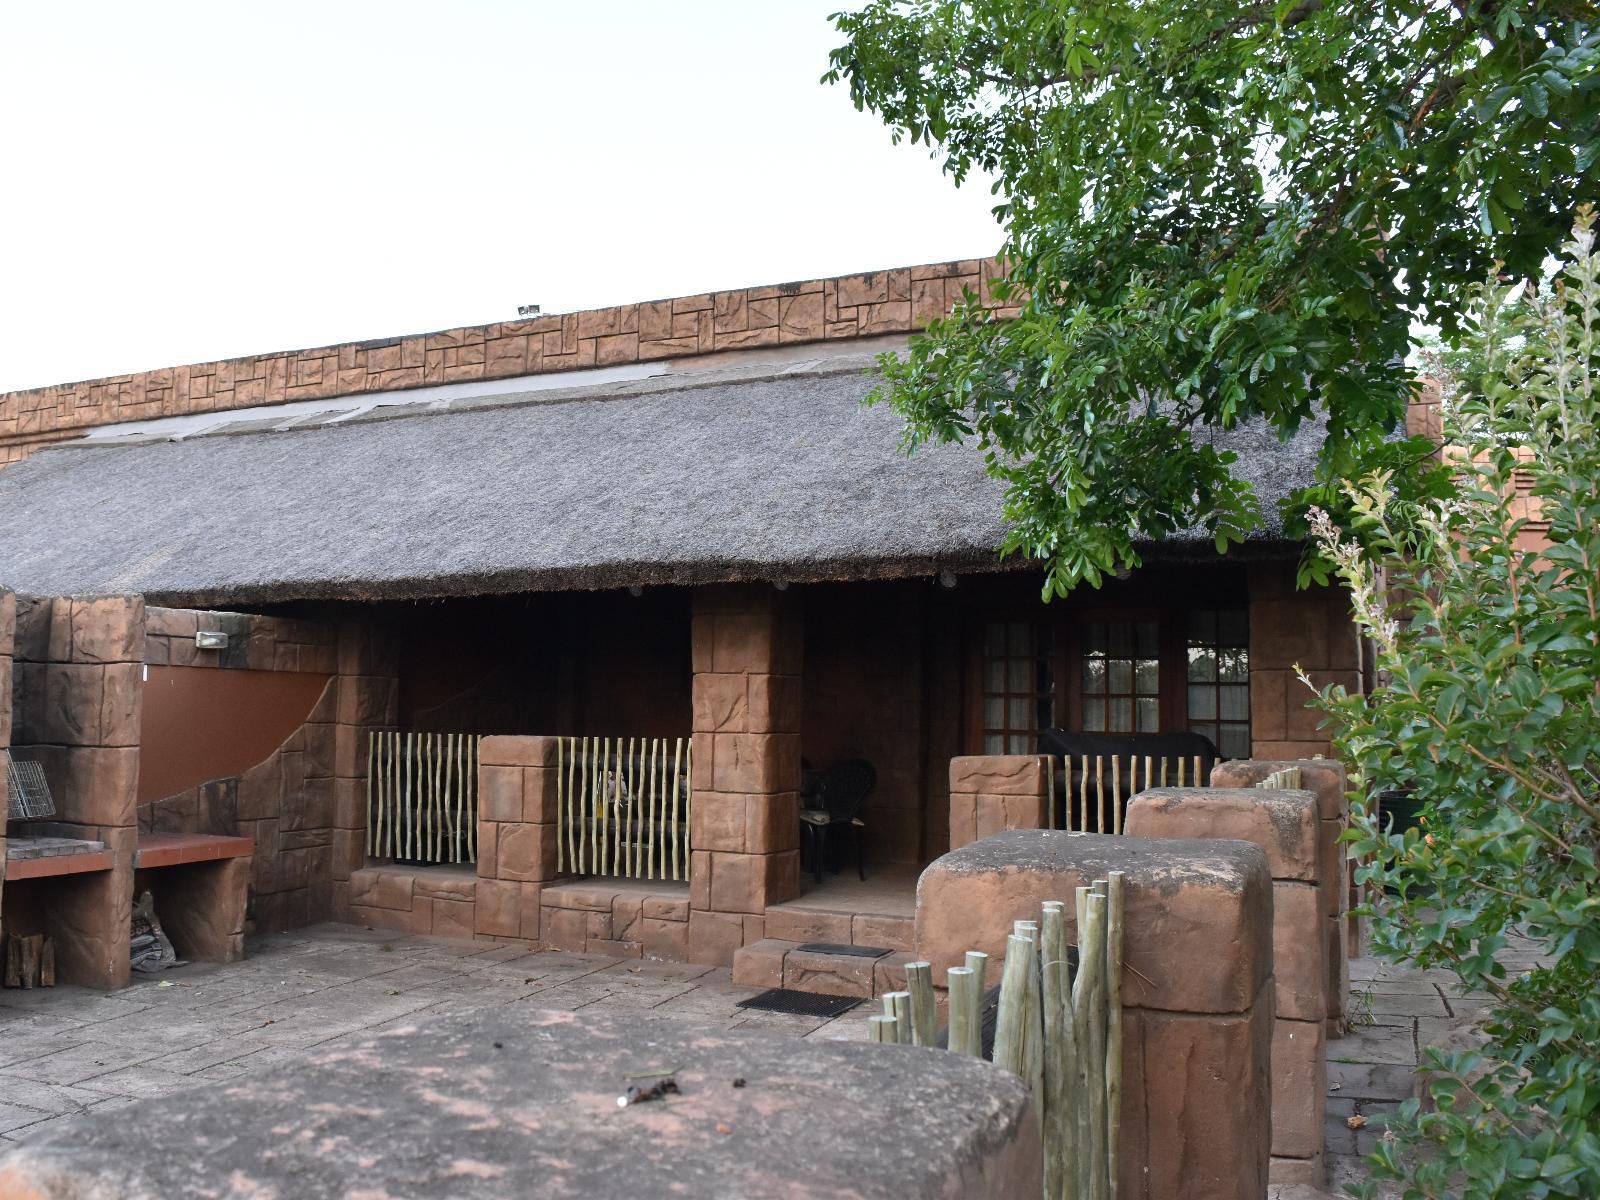 Tipperary Game Lodge Nelspruit Mpumalanga South Africa Building, Architecture, Cabin, Ruin